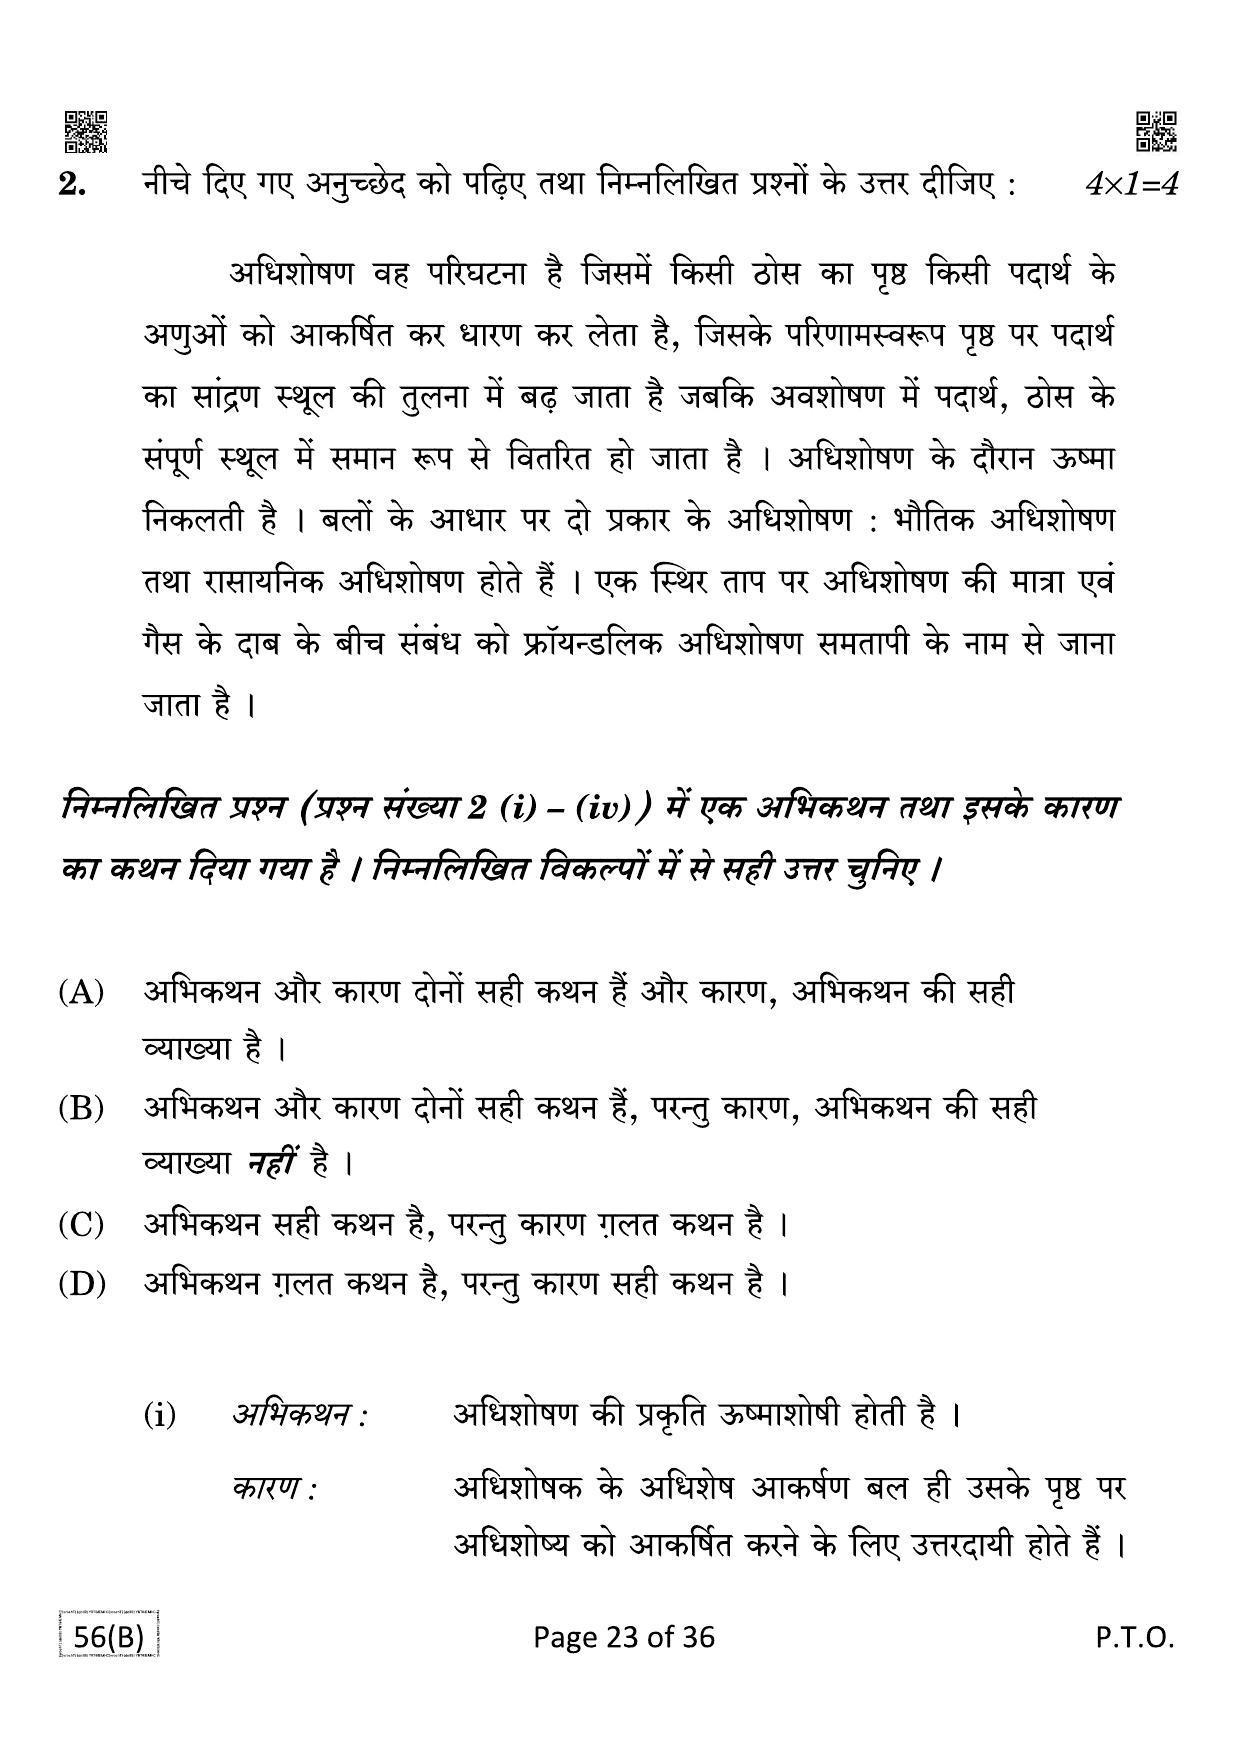 CBSE Class 12 QP_043_CHEMISTRY_FOR_BLIND_CANDIDATES 2021 Compartment Question Paper - Page 23